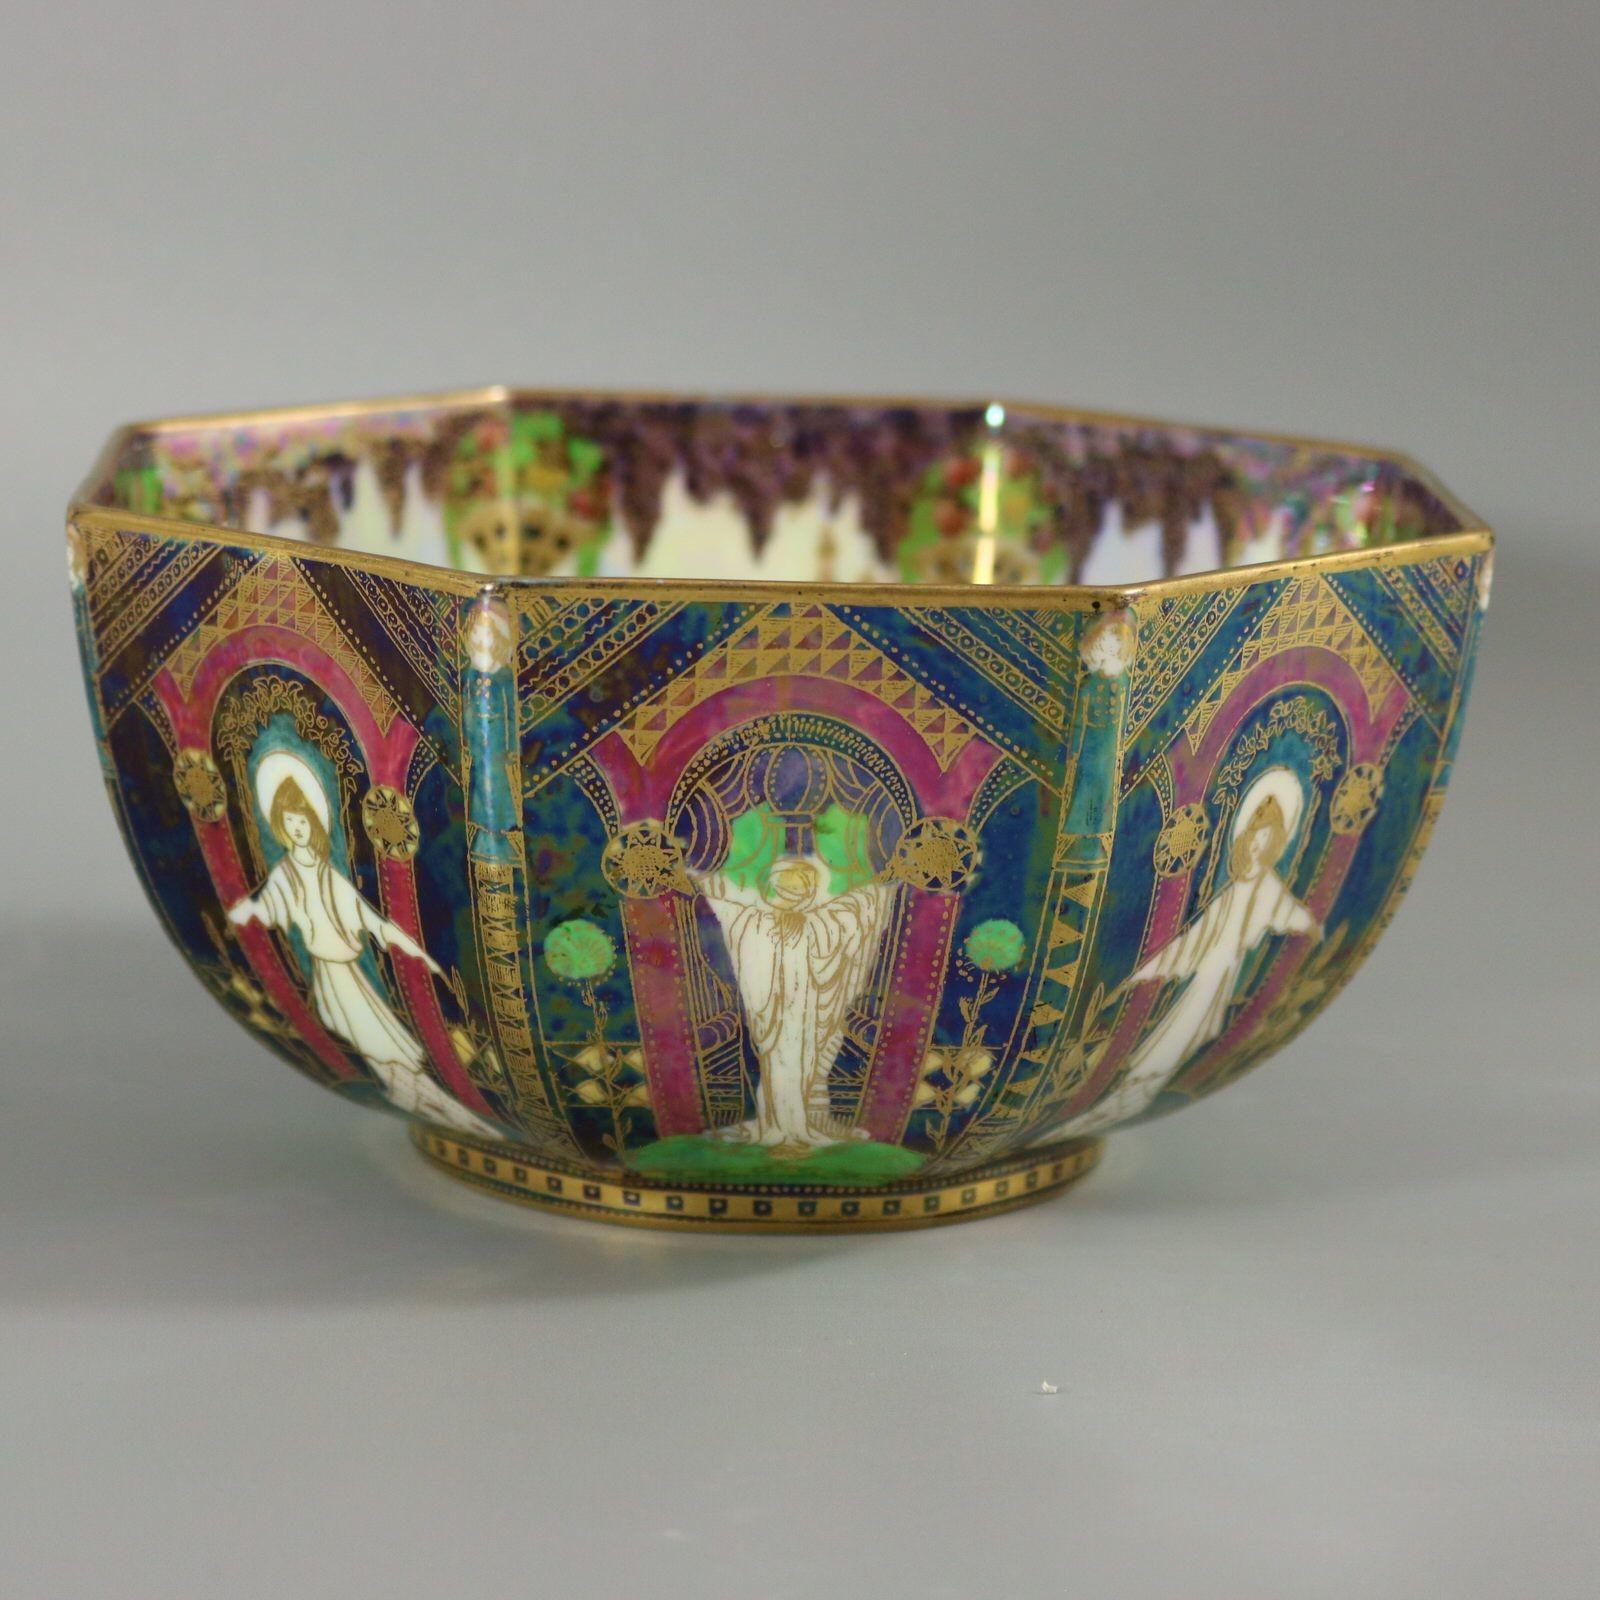 Wedgwood Fairyland Lustre 'Geisha' Octagonal Bowl In Excellent Condition For Sale In Chelmsford, Essex